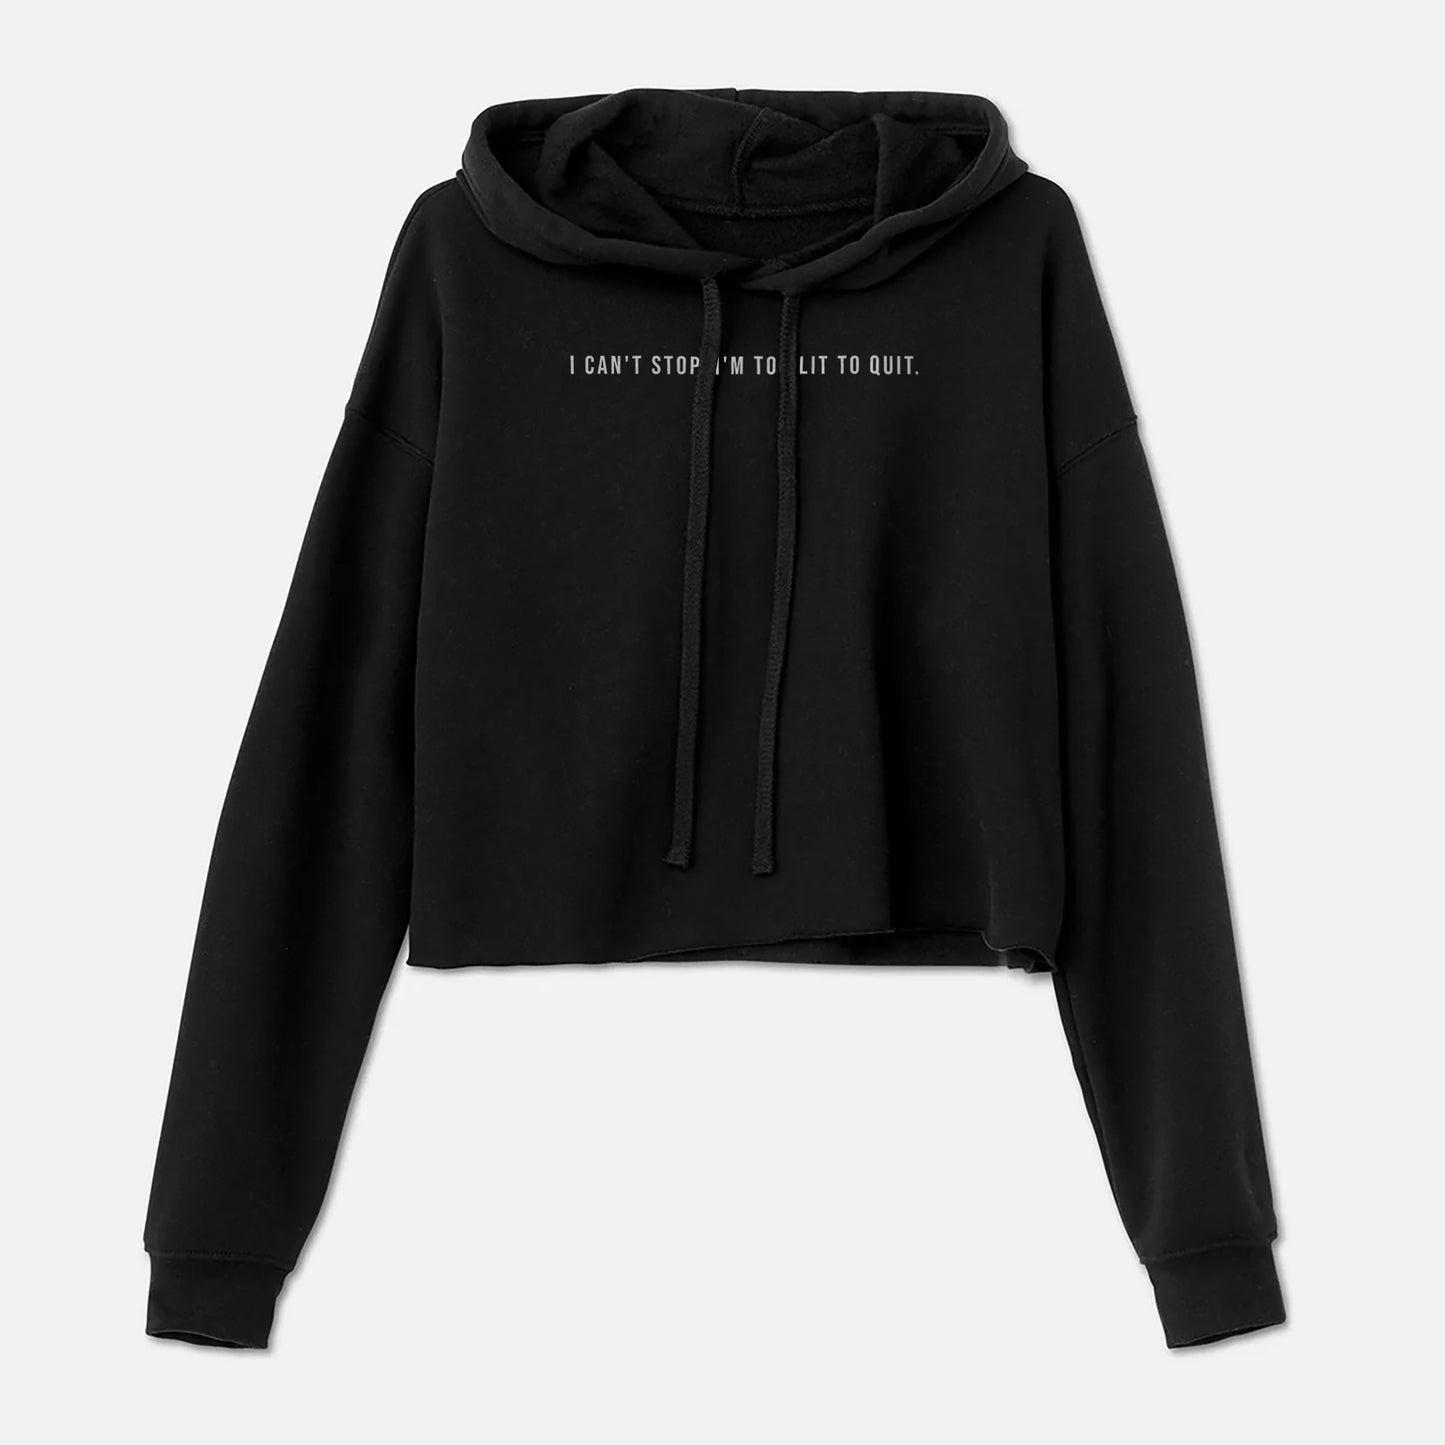 Too Lit to Quit Cropped Hoodie Solid Black Image